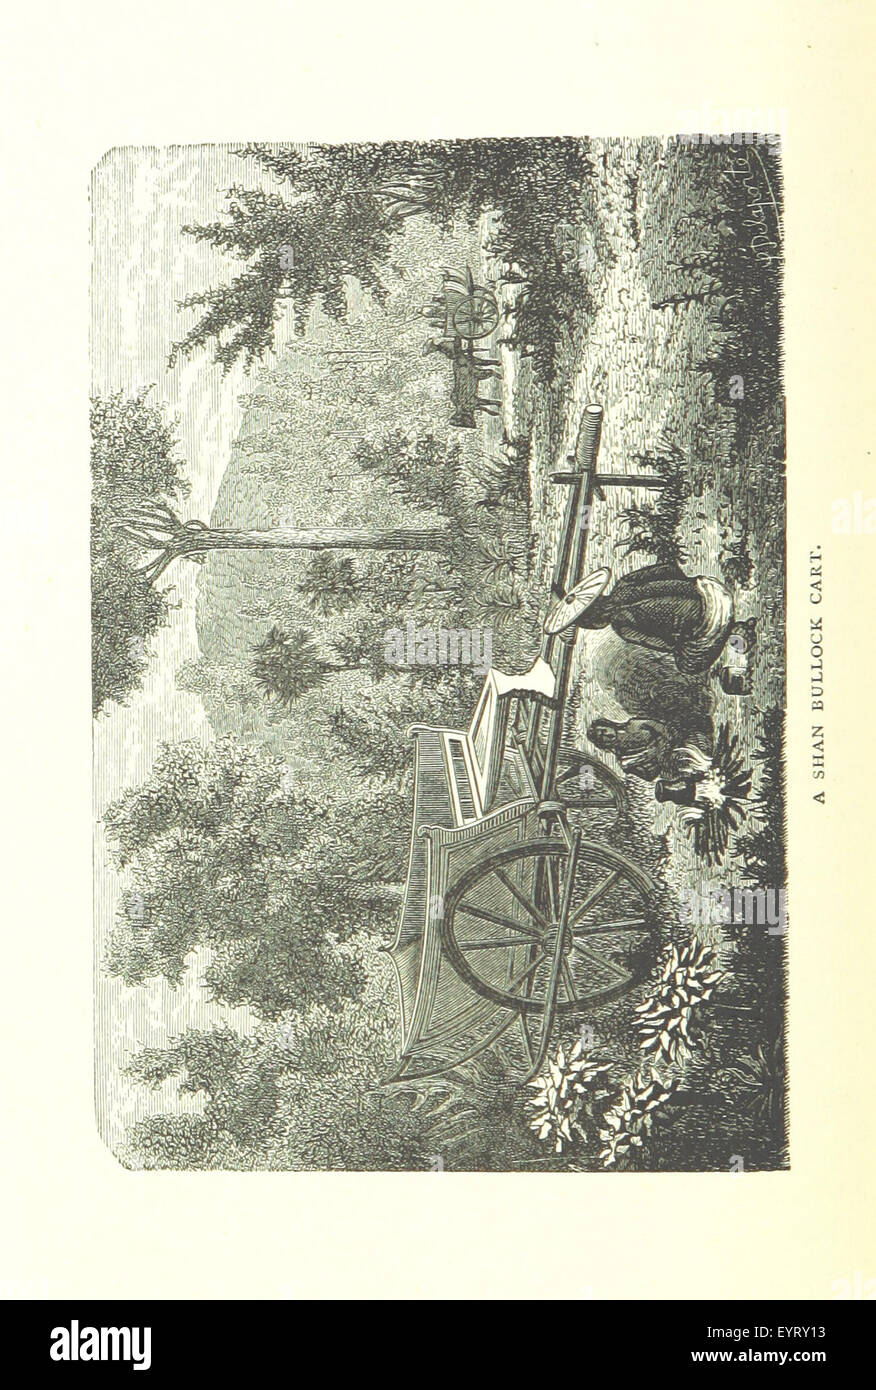 Image taken from page 186 of 'Amongst the Shans ... With ... illustrations, and an historical sketch of the Shans by Holt S. Hallett ... Preceded by an introduction on the cradle of the Shan race by Terrien de Lacouperie' Image taken from page 186 of 'Amongst the Shans Stock Photo